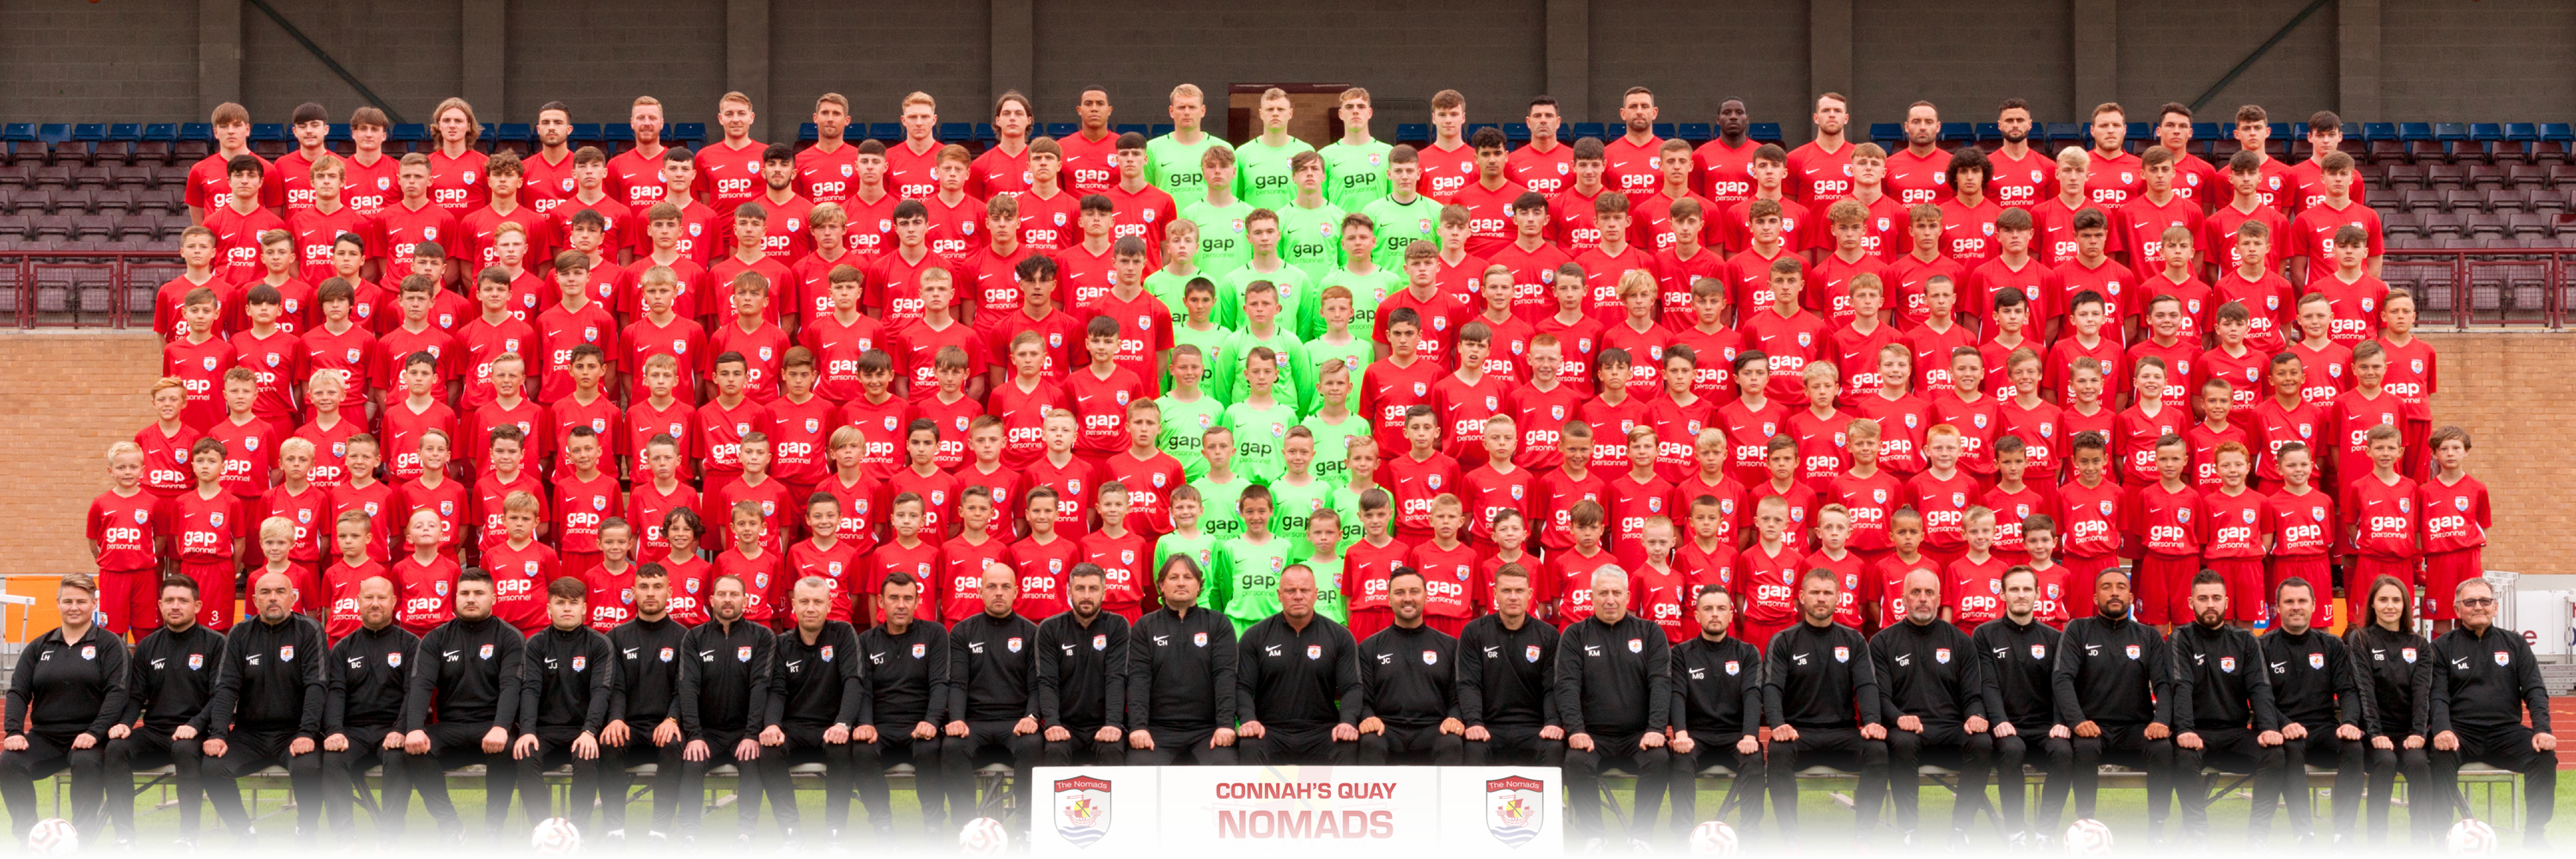 Nomads looking for new club sponsor